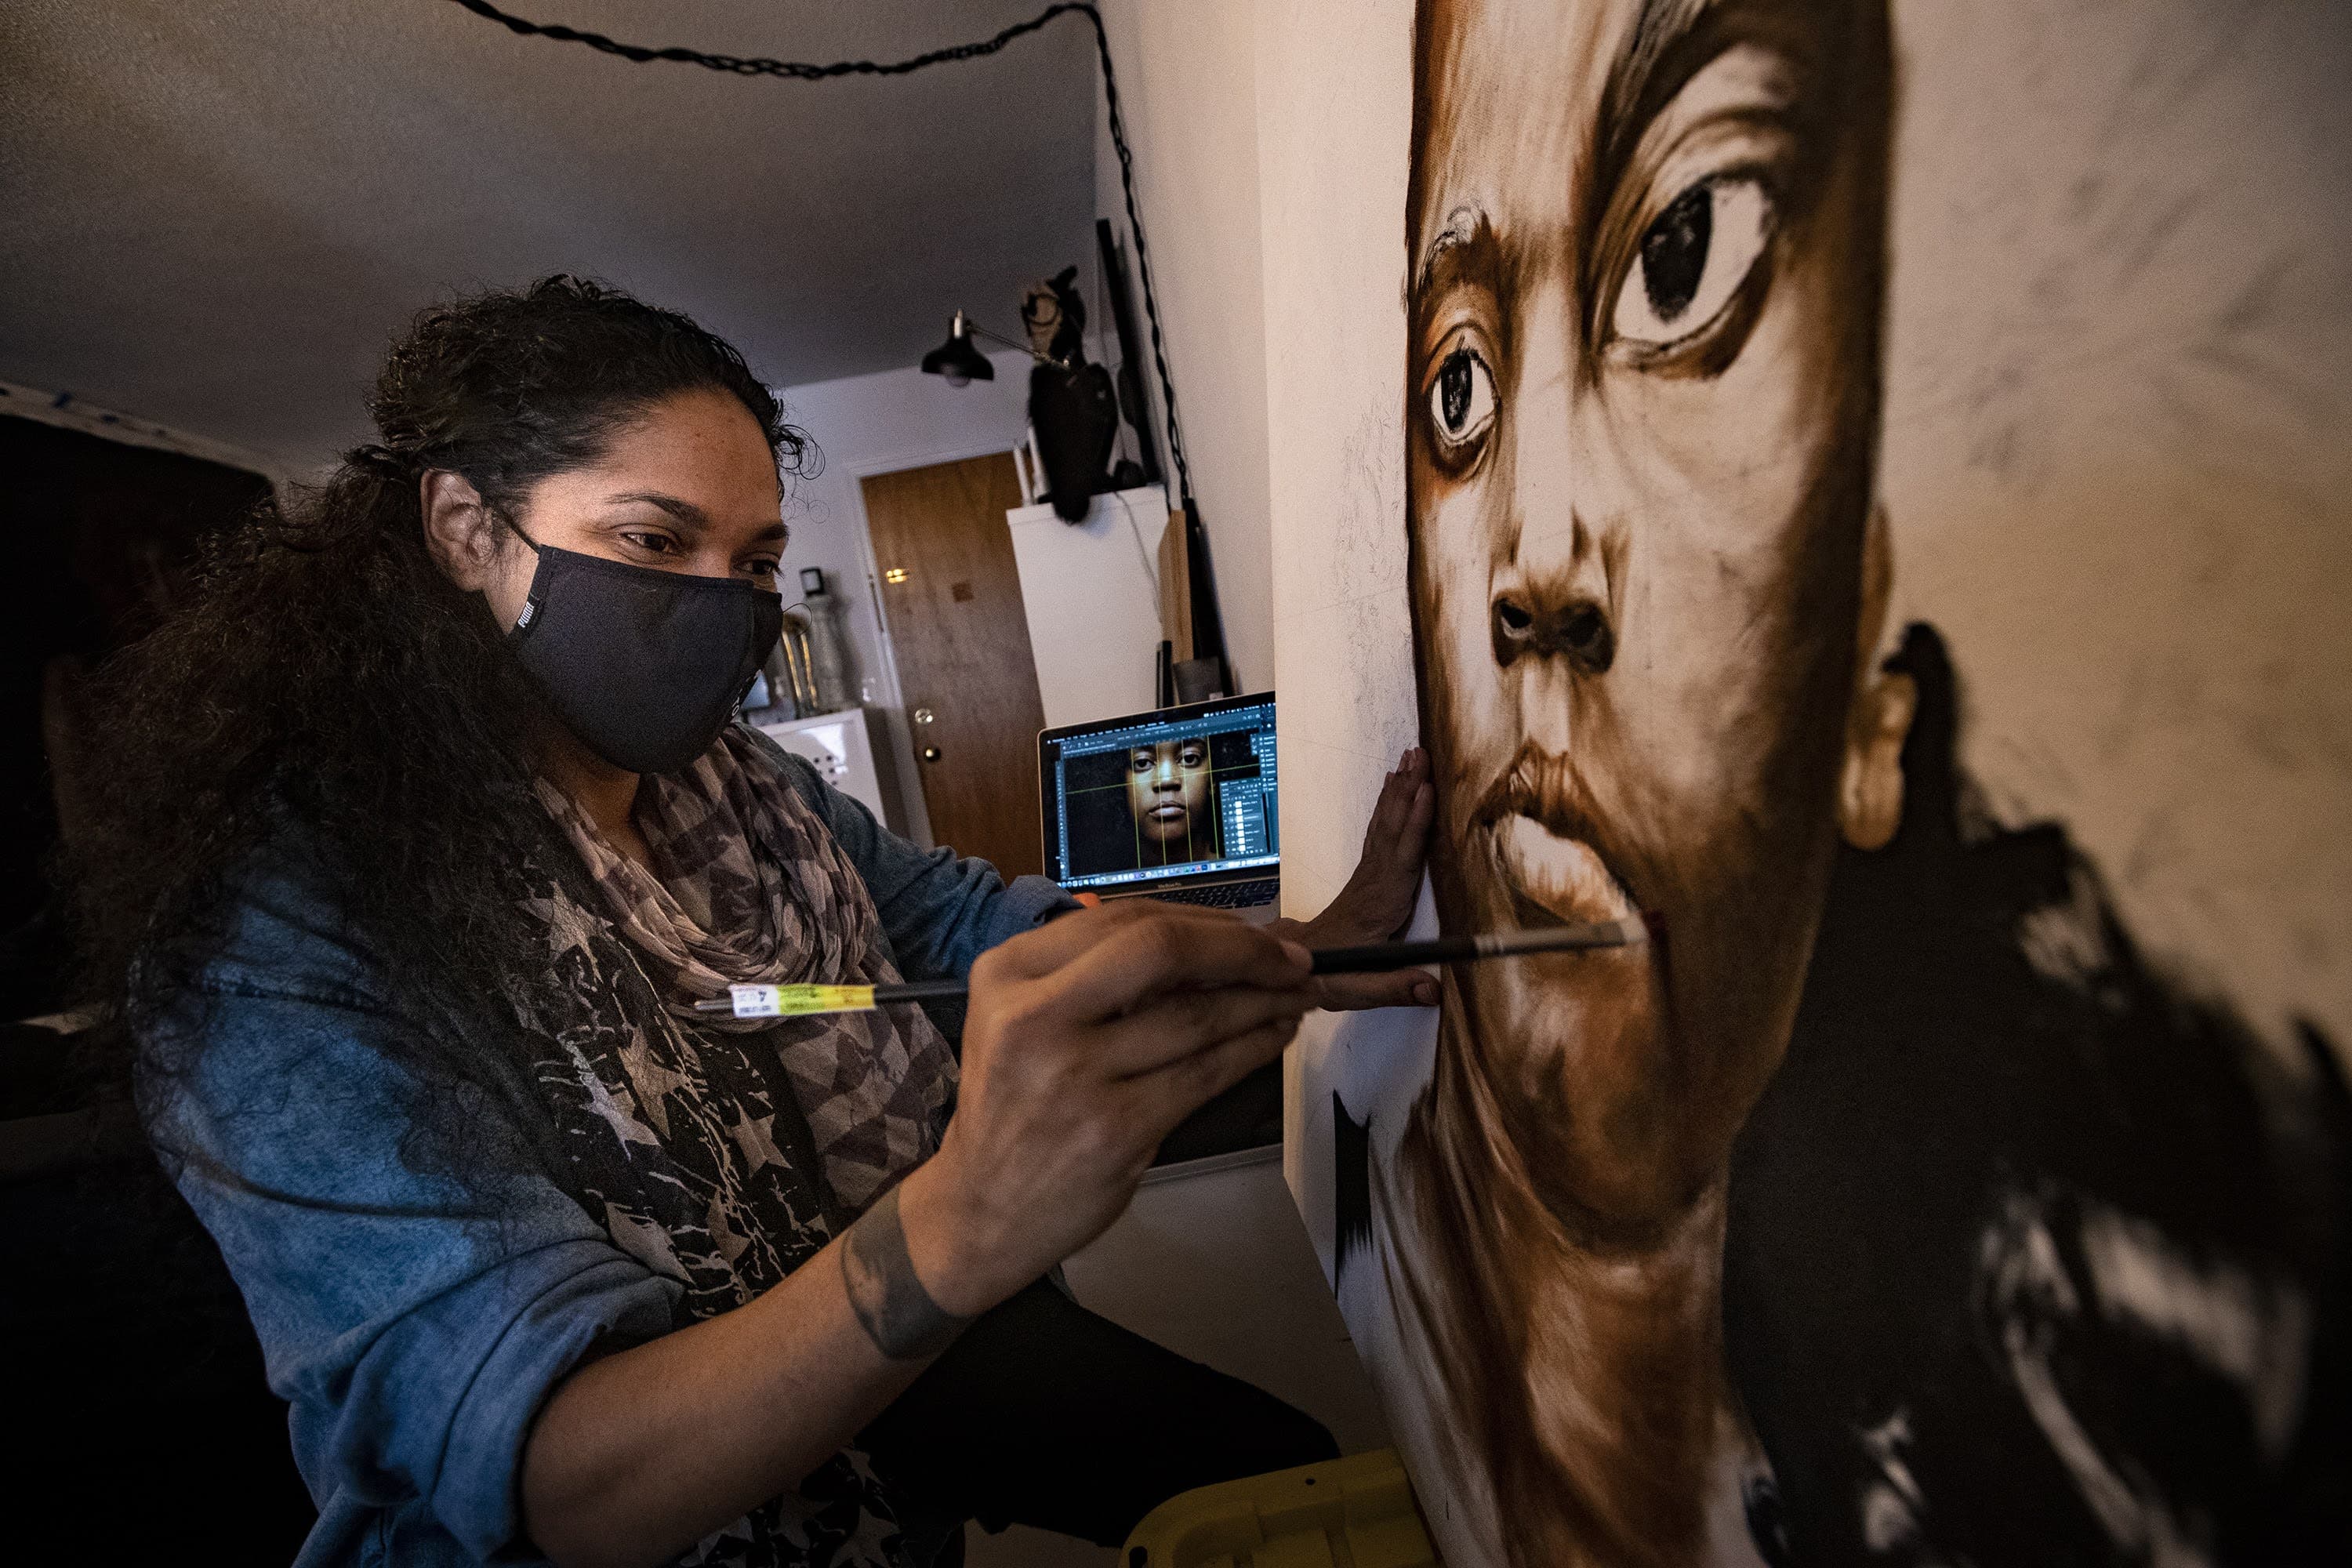 Artist Marla McLeod works on a piece featuring her niece at her studio in New Haven. (Jesse Costa/WBUR)